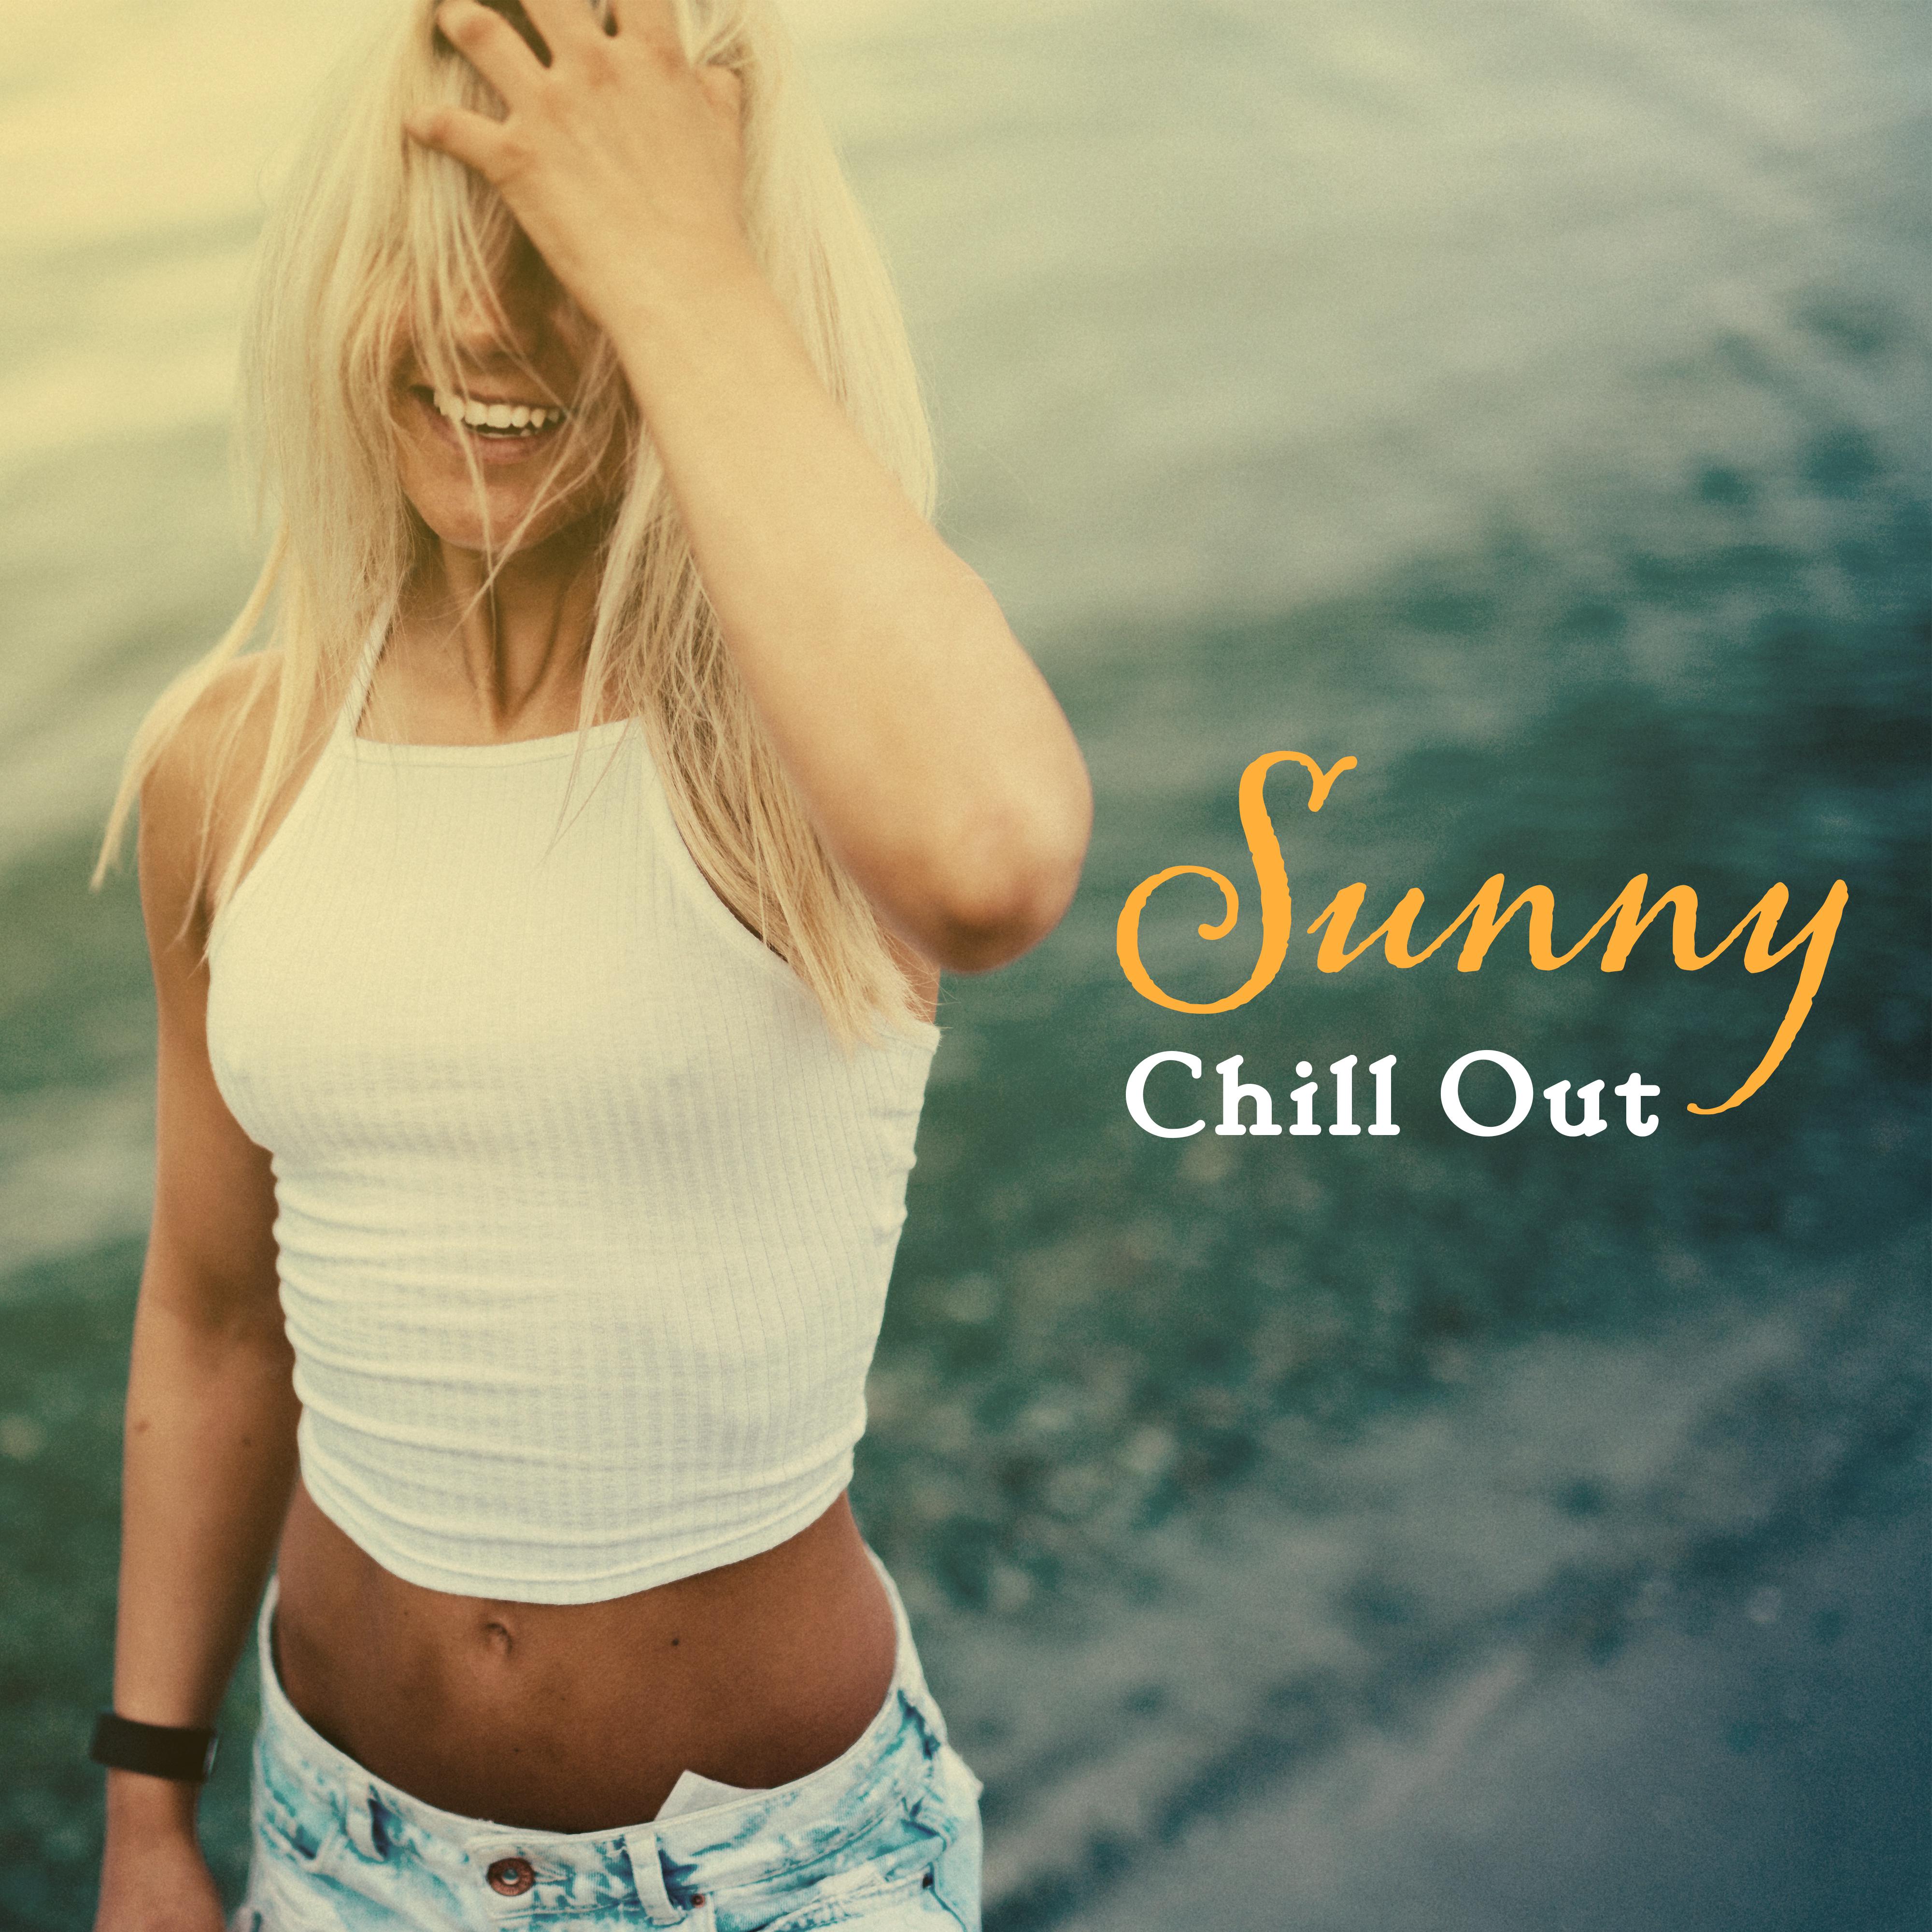 Sunny Chill Out  – Chill Out Hits, Deep Chillout, Summer Music, Ibiza, Chill Out Lounge, Chill Out 2017